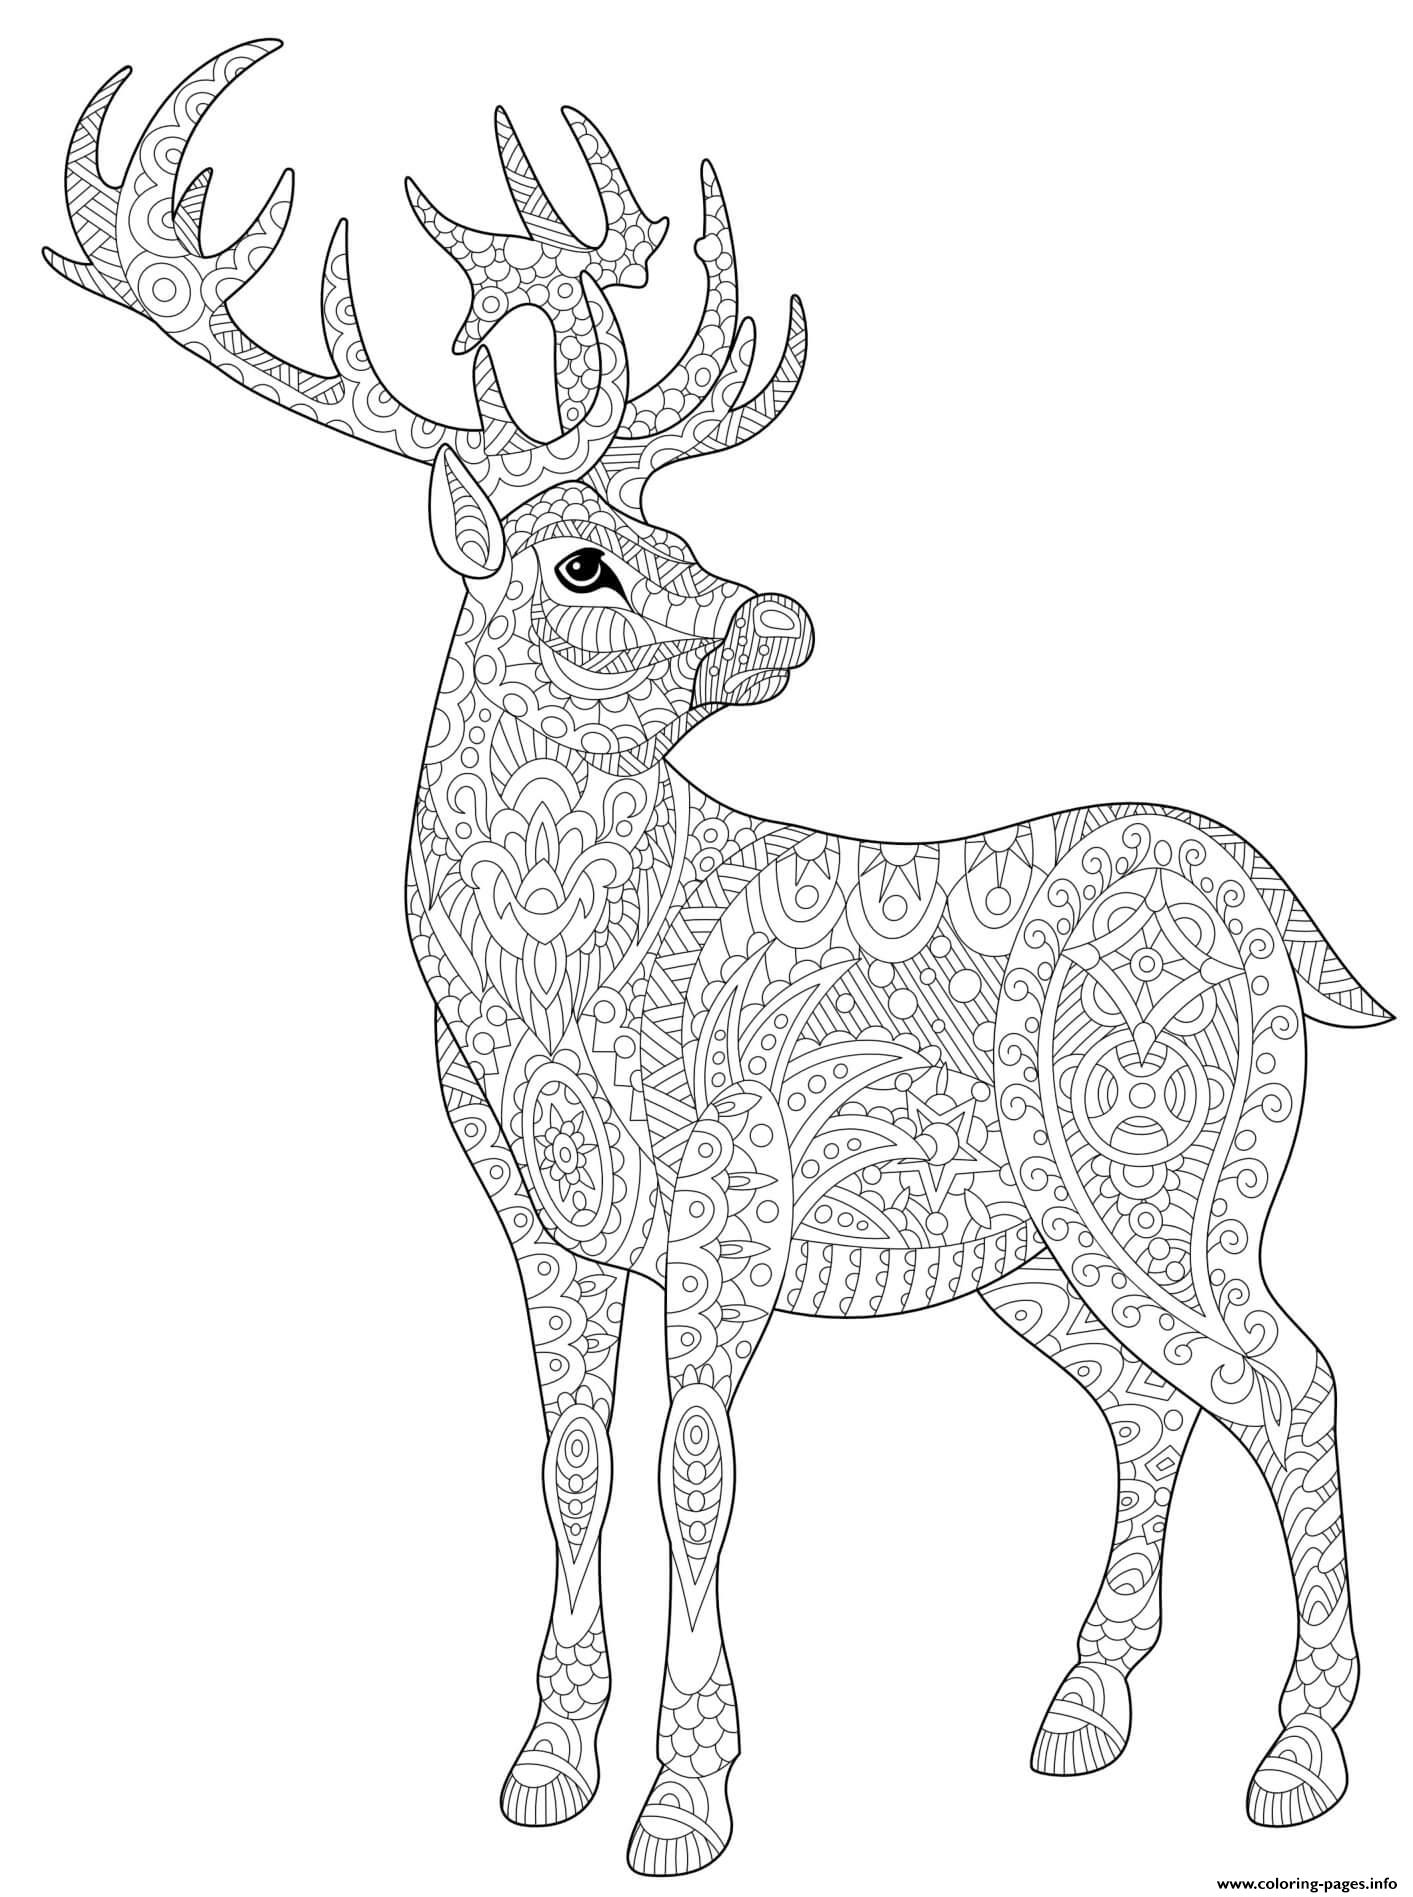 Christmas For Adults Stag Deer Reindeer Doodle coloring